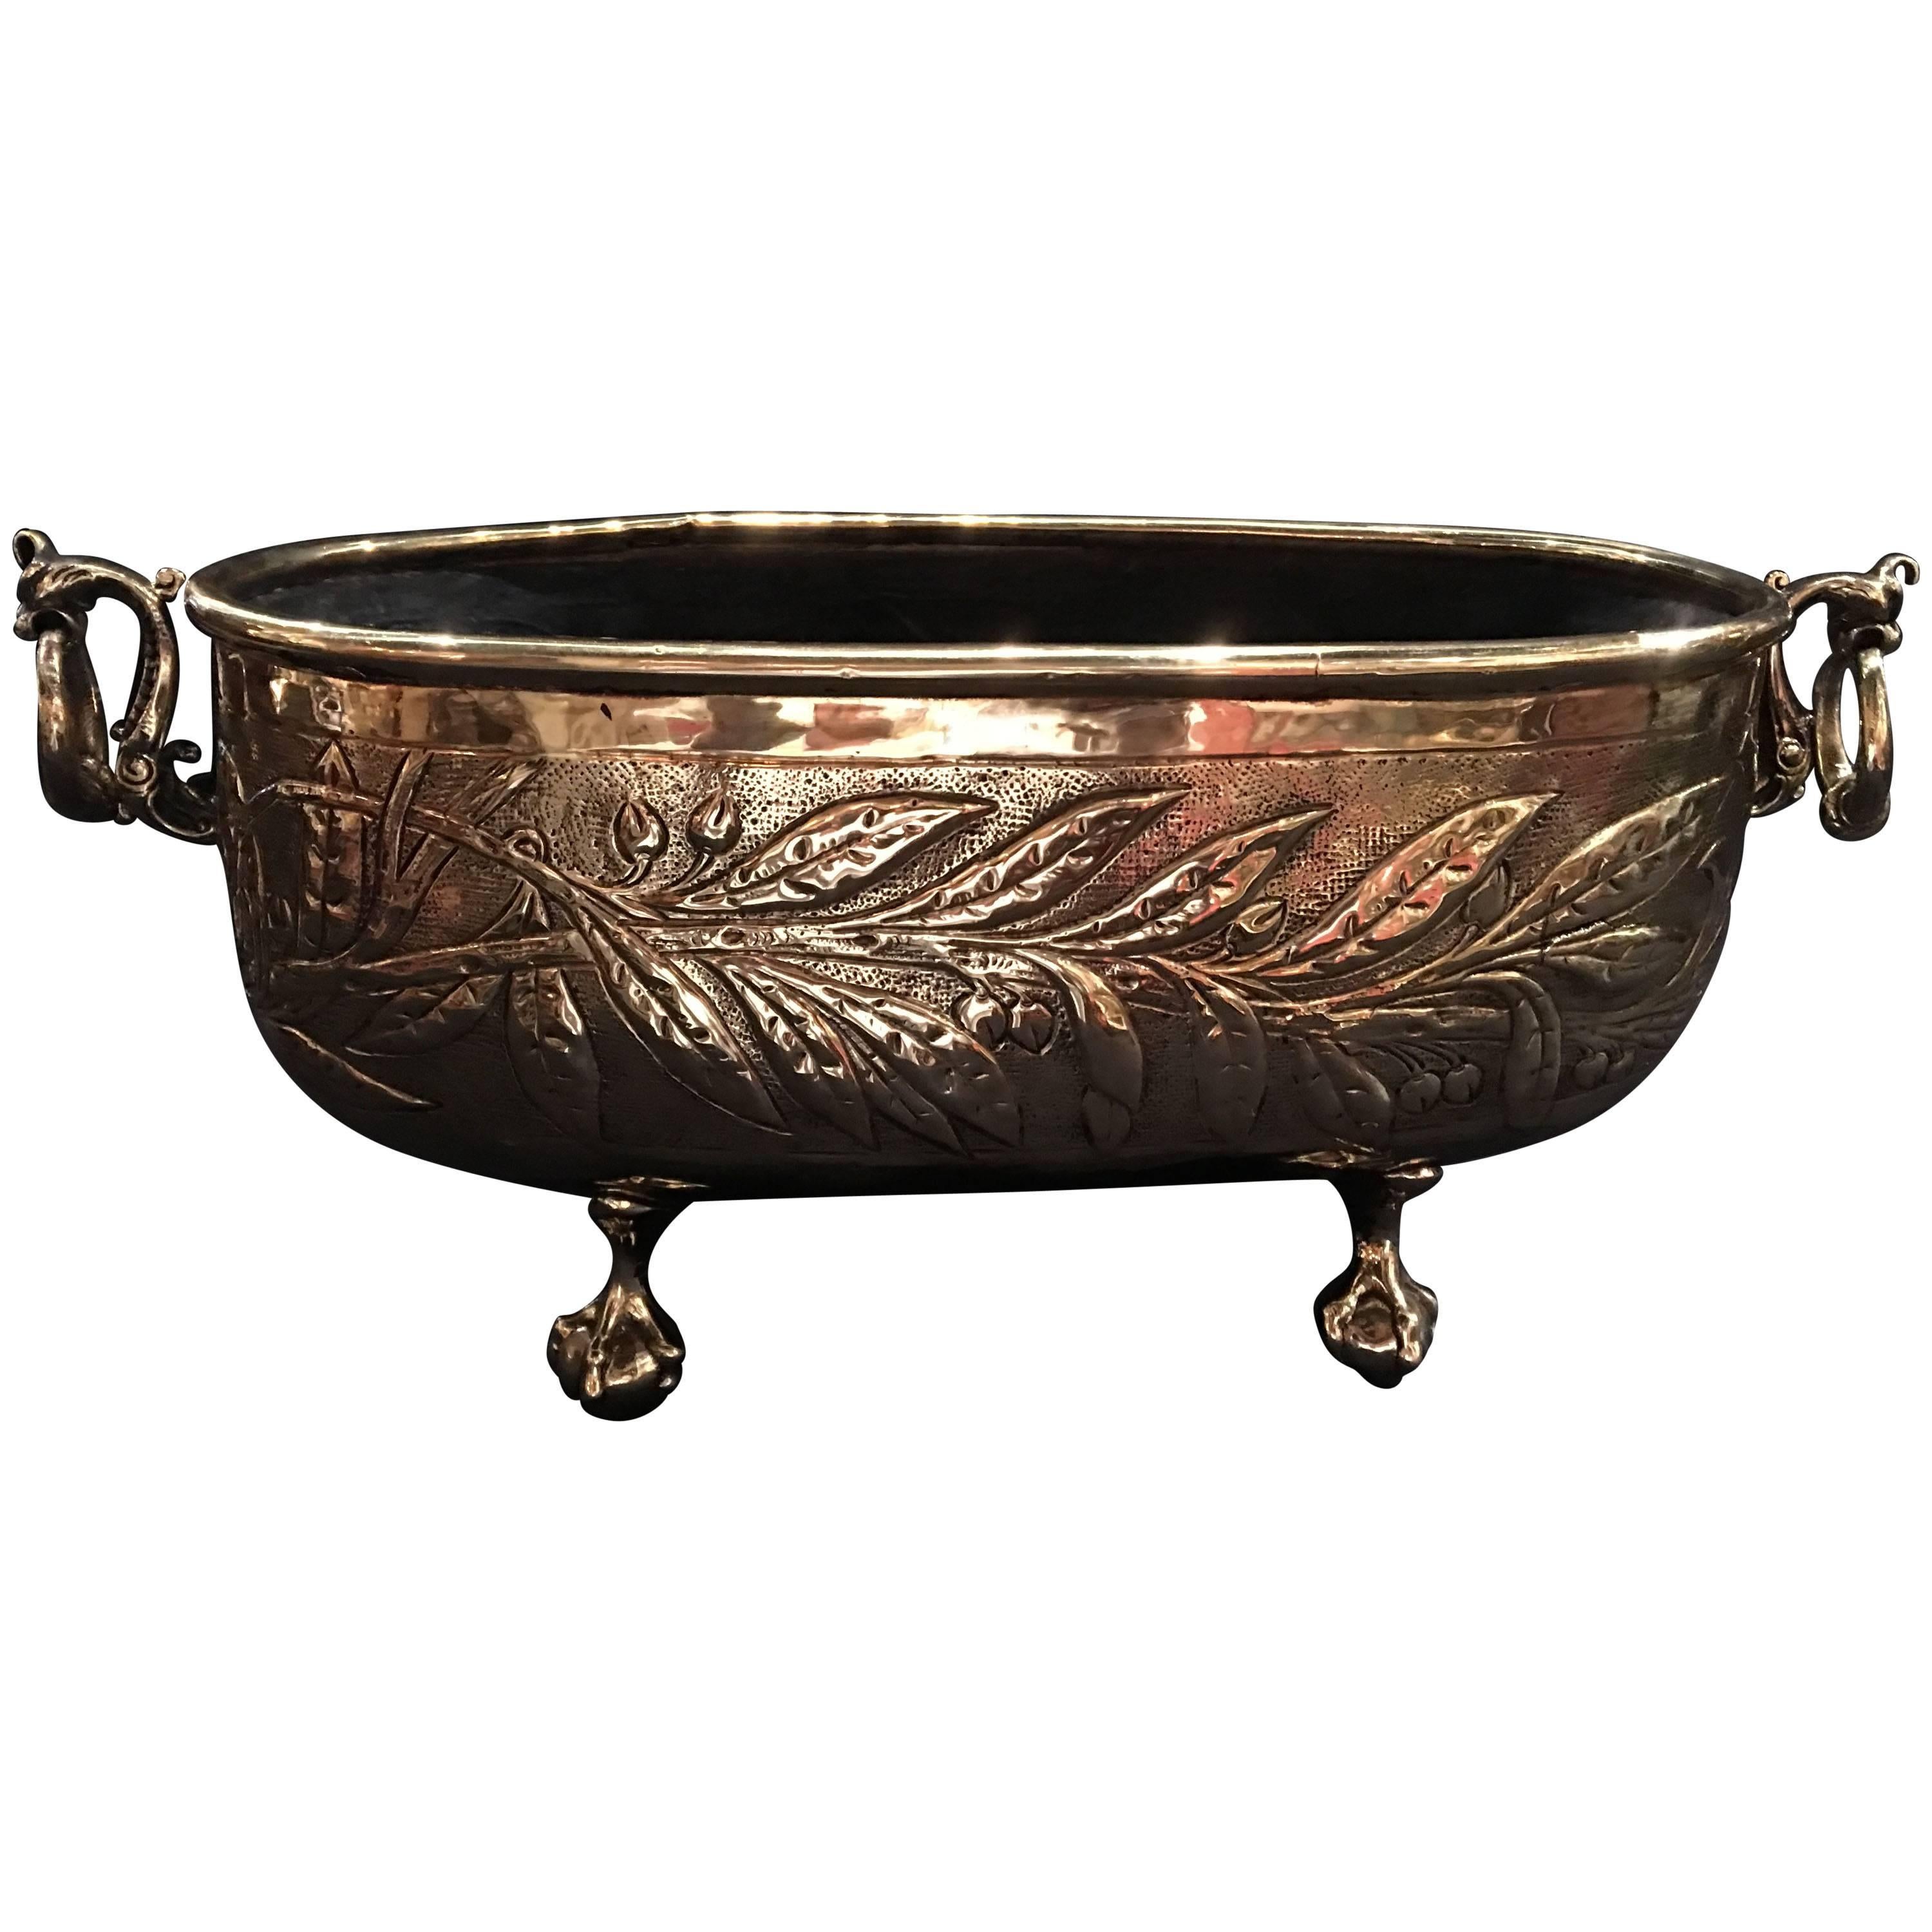 French Polished Brass Oval Jardinière or Planter, 19th Century